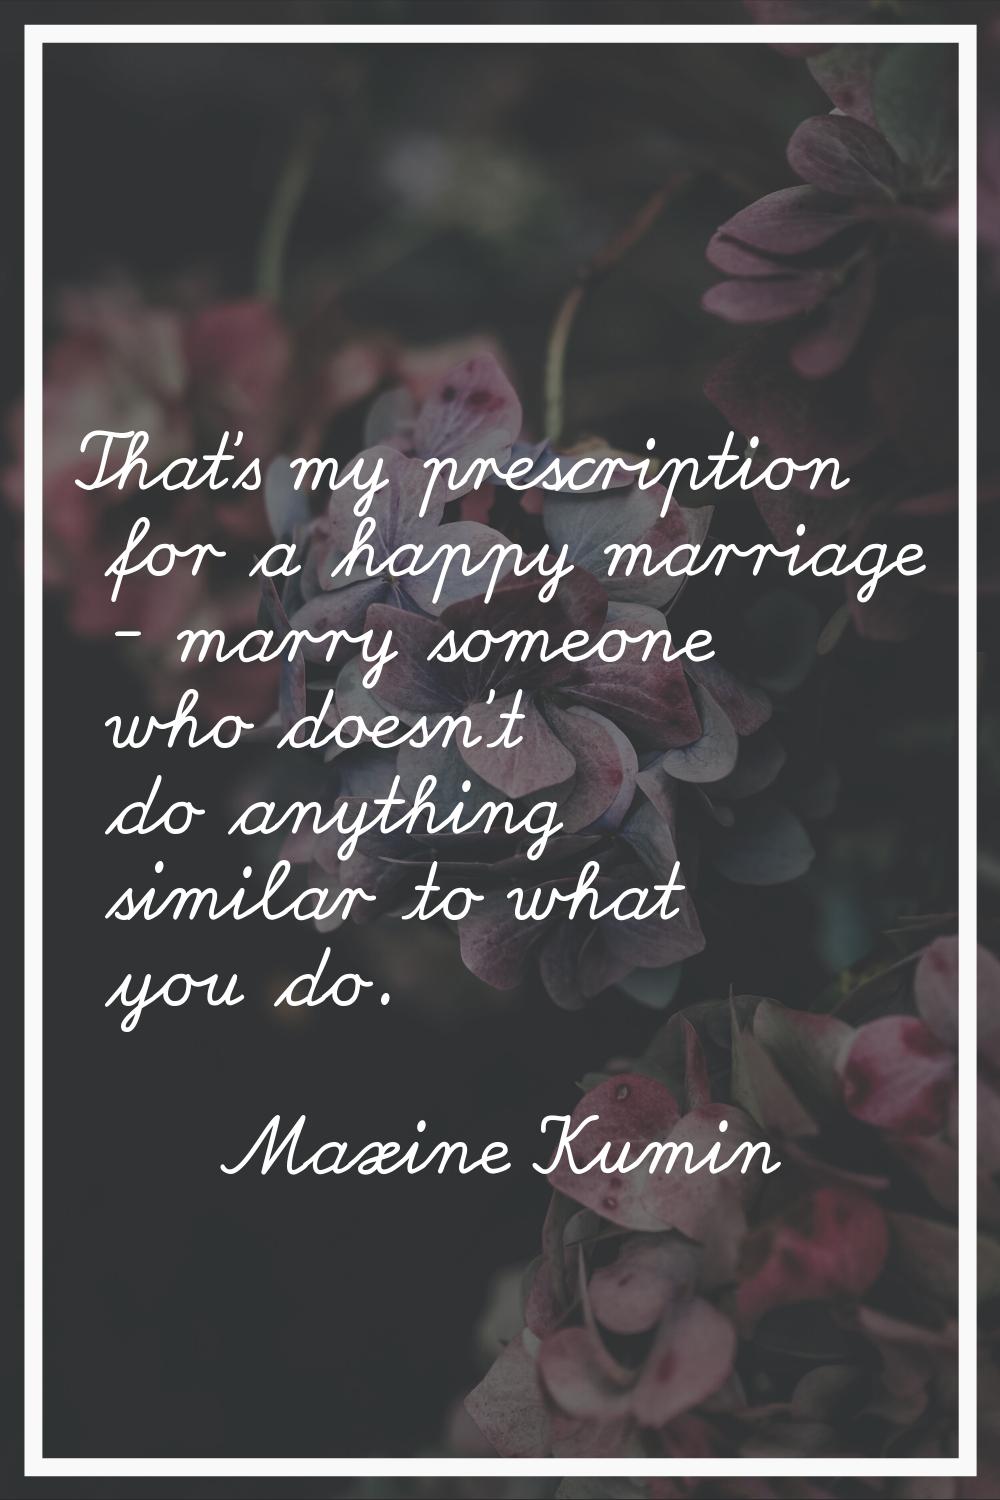 That's my prescription for a happy marriage - marry someone who doesn't do anything similar to what